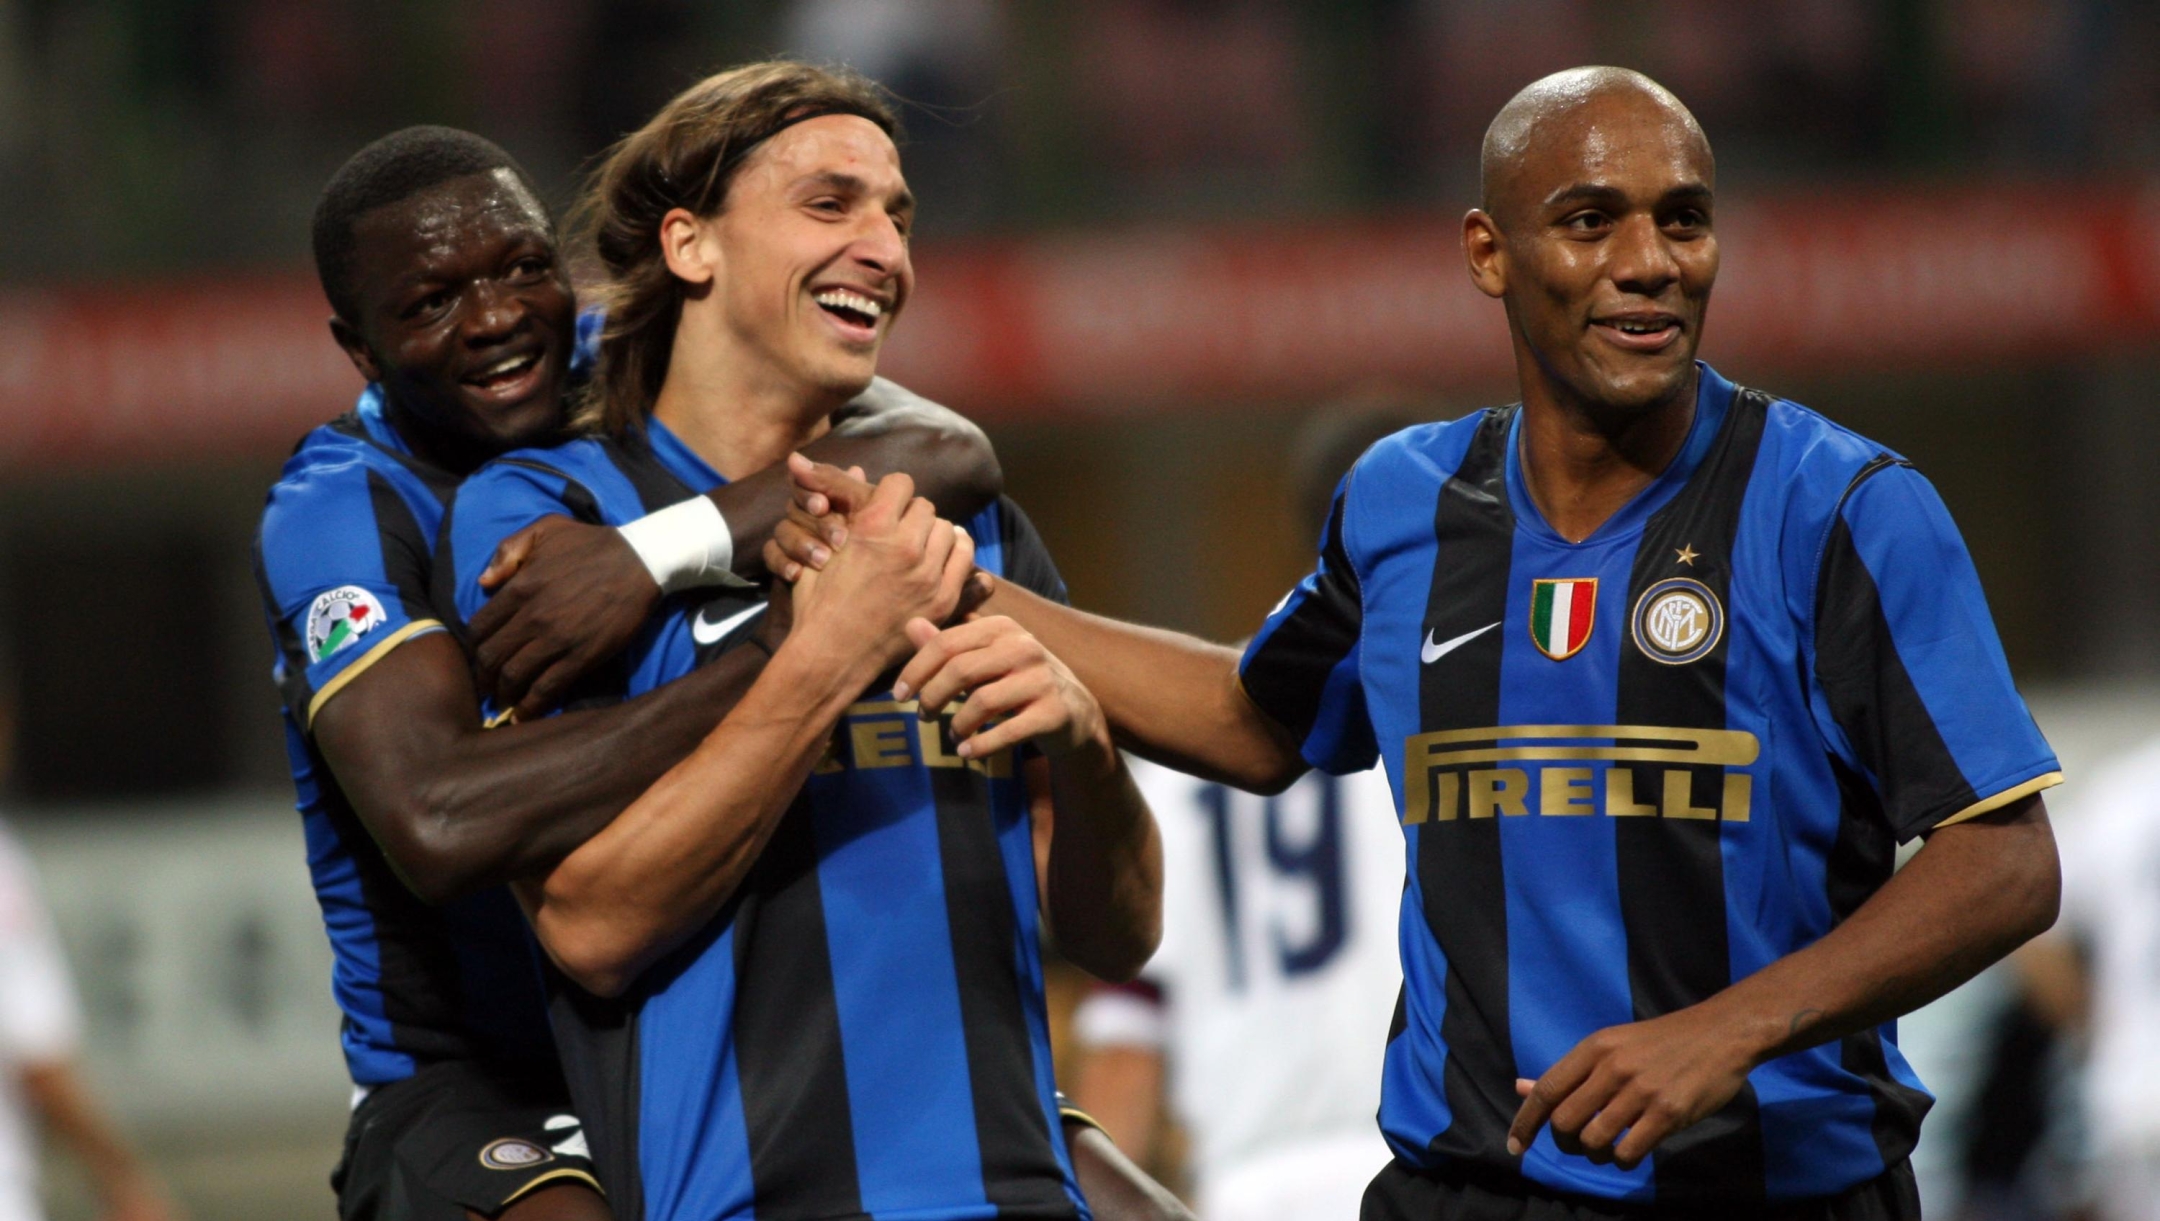 MILAN, ITALY - OCTOBER 04:  Zlatan Ibrahimovic of Inter Milan celebrates after scoring the first goal with Sulley Muntar and Maicon during the Serie A match between FC Inter Milan and Bologna FC at the Stadio Meaazza on October 04, 2008 in Milan, Italy.  (Photo by New Press/Getty Images)